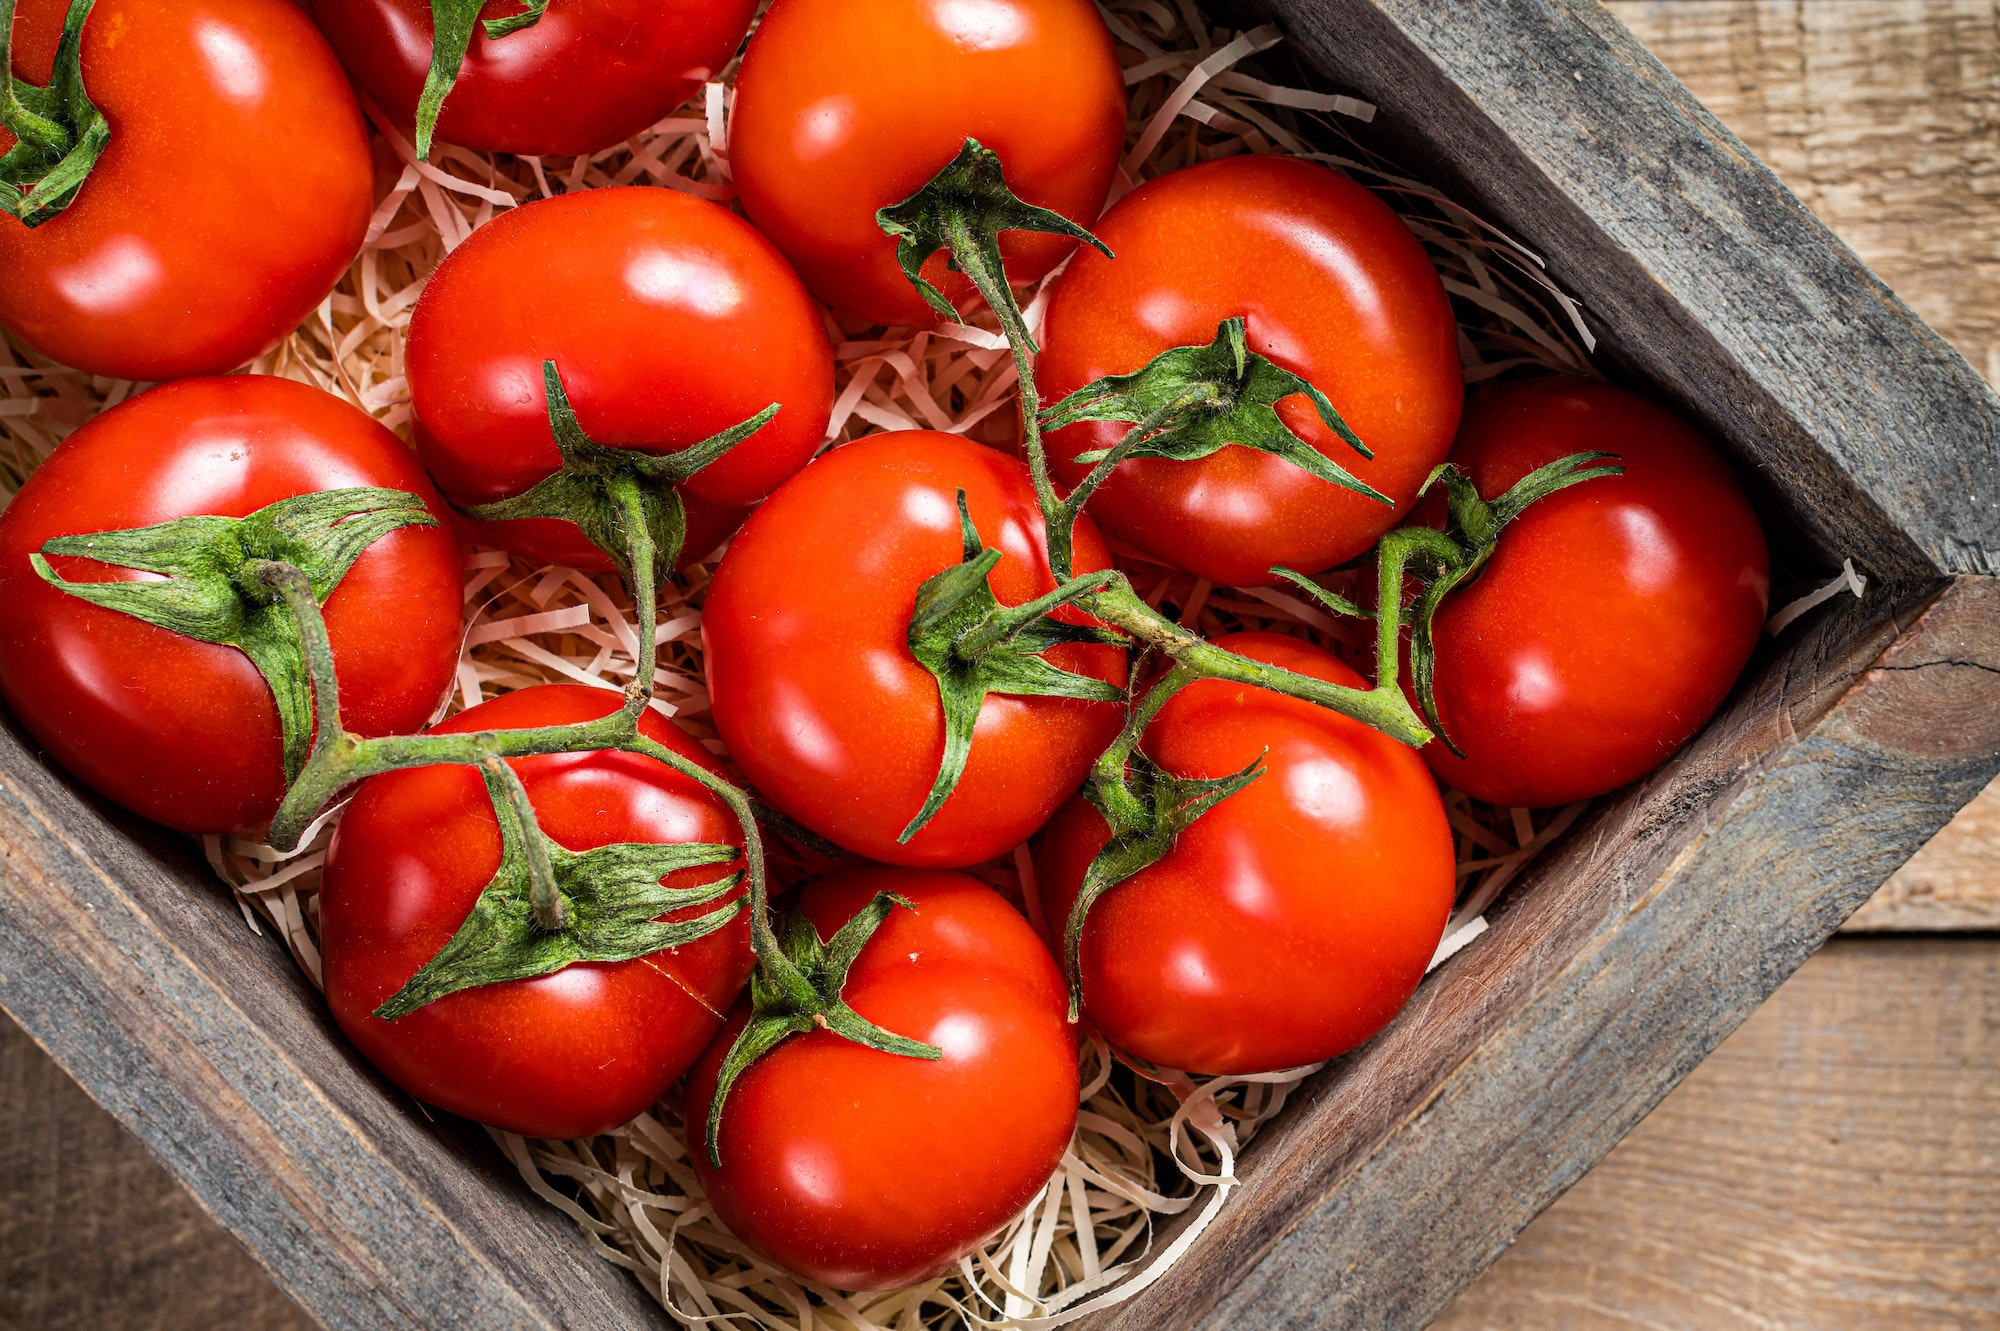 Ripe Red tomatoes in wooden market box. Wooden background. Top view